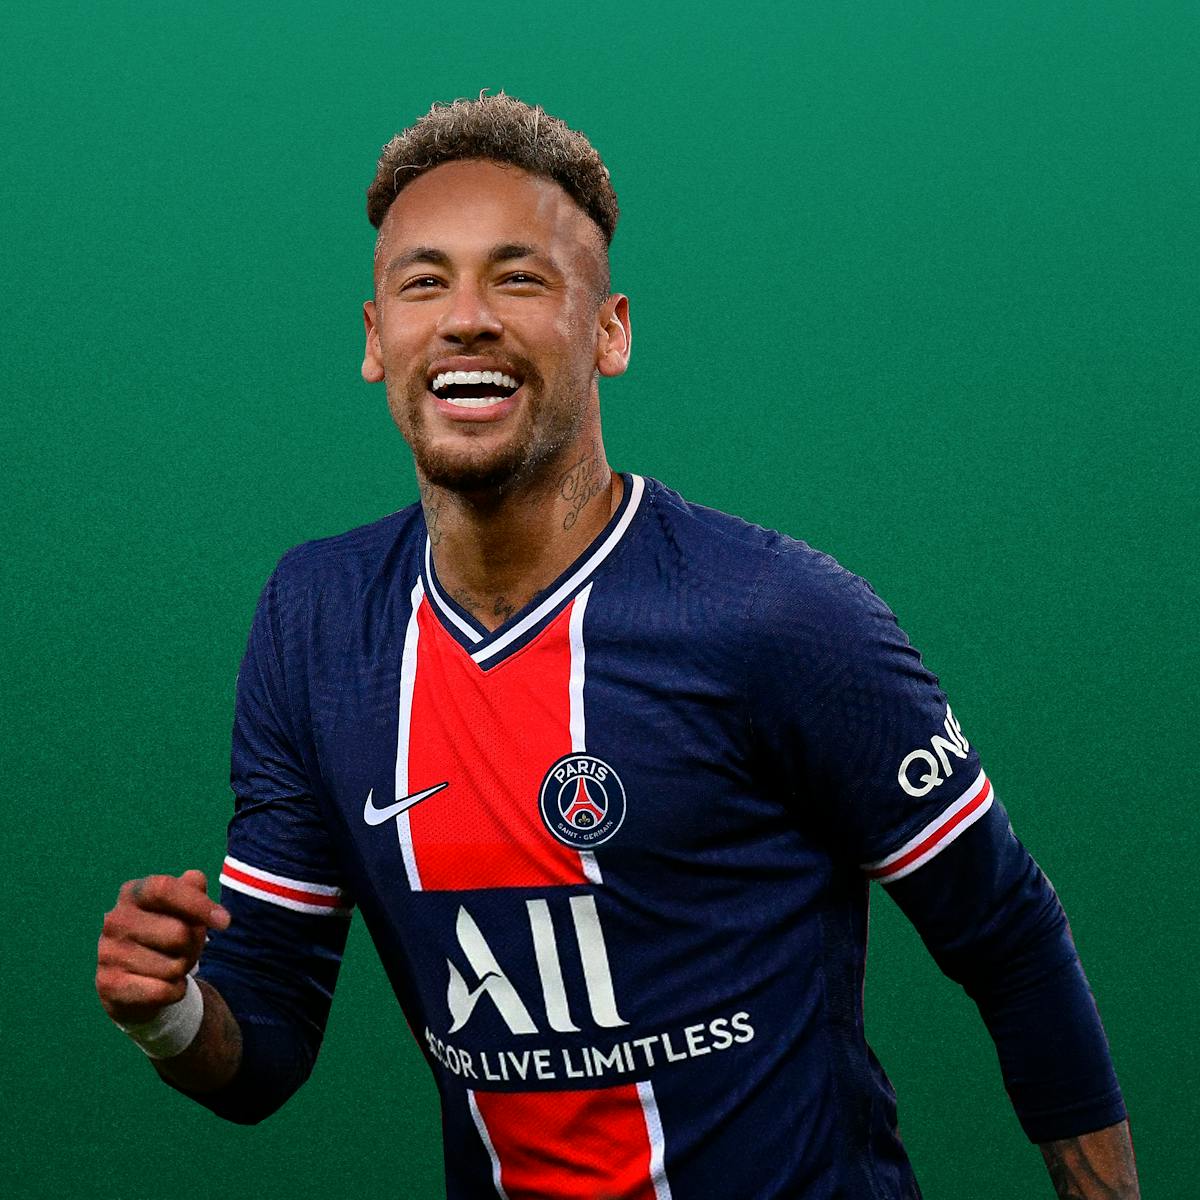 Neymar wears a navy and red uniform against a green background.